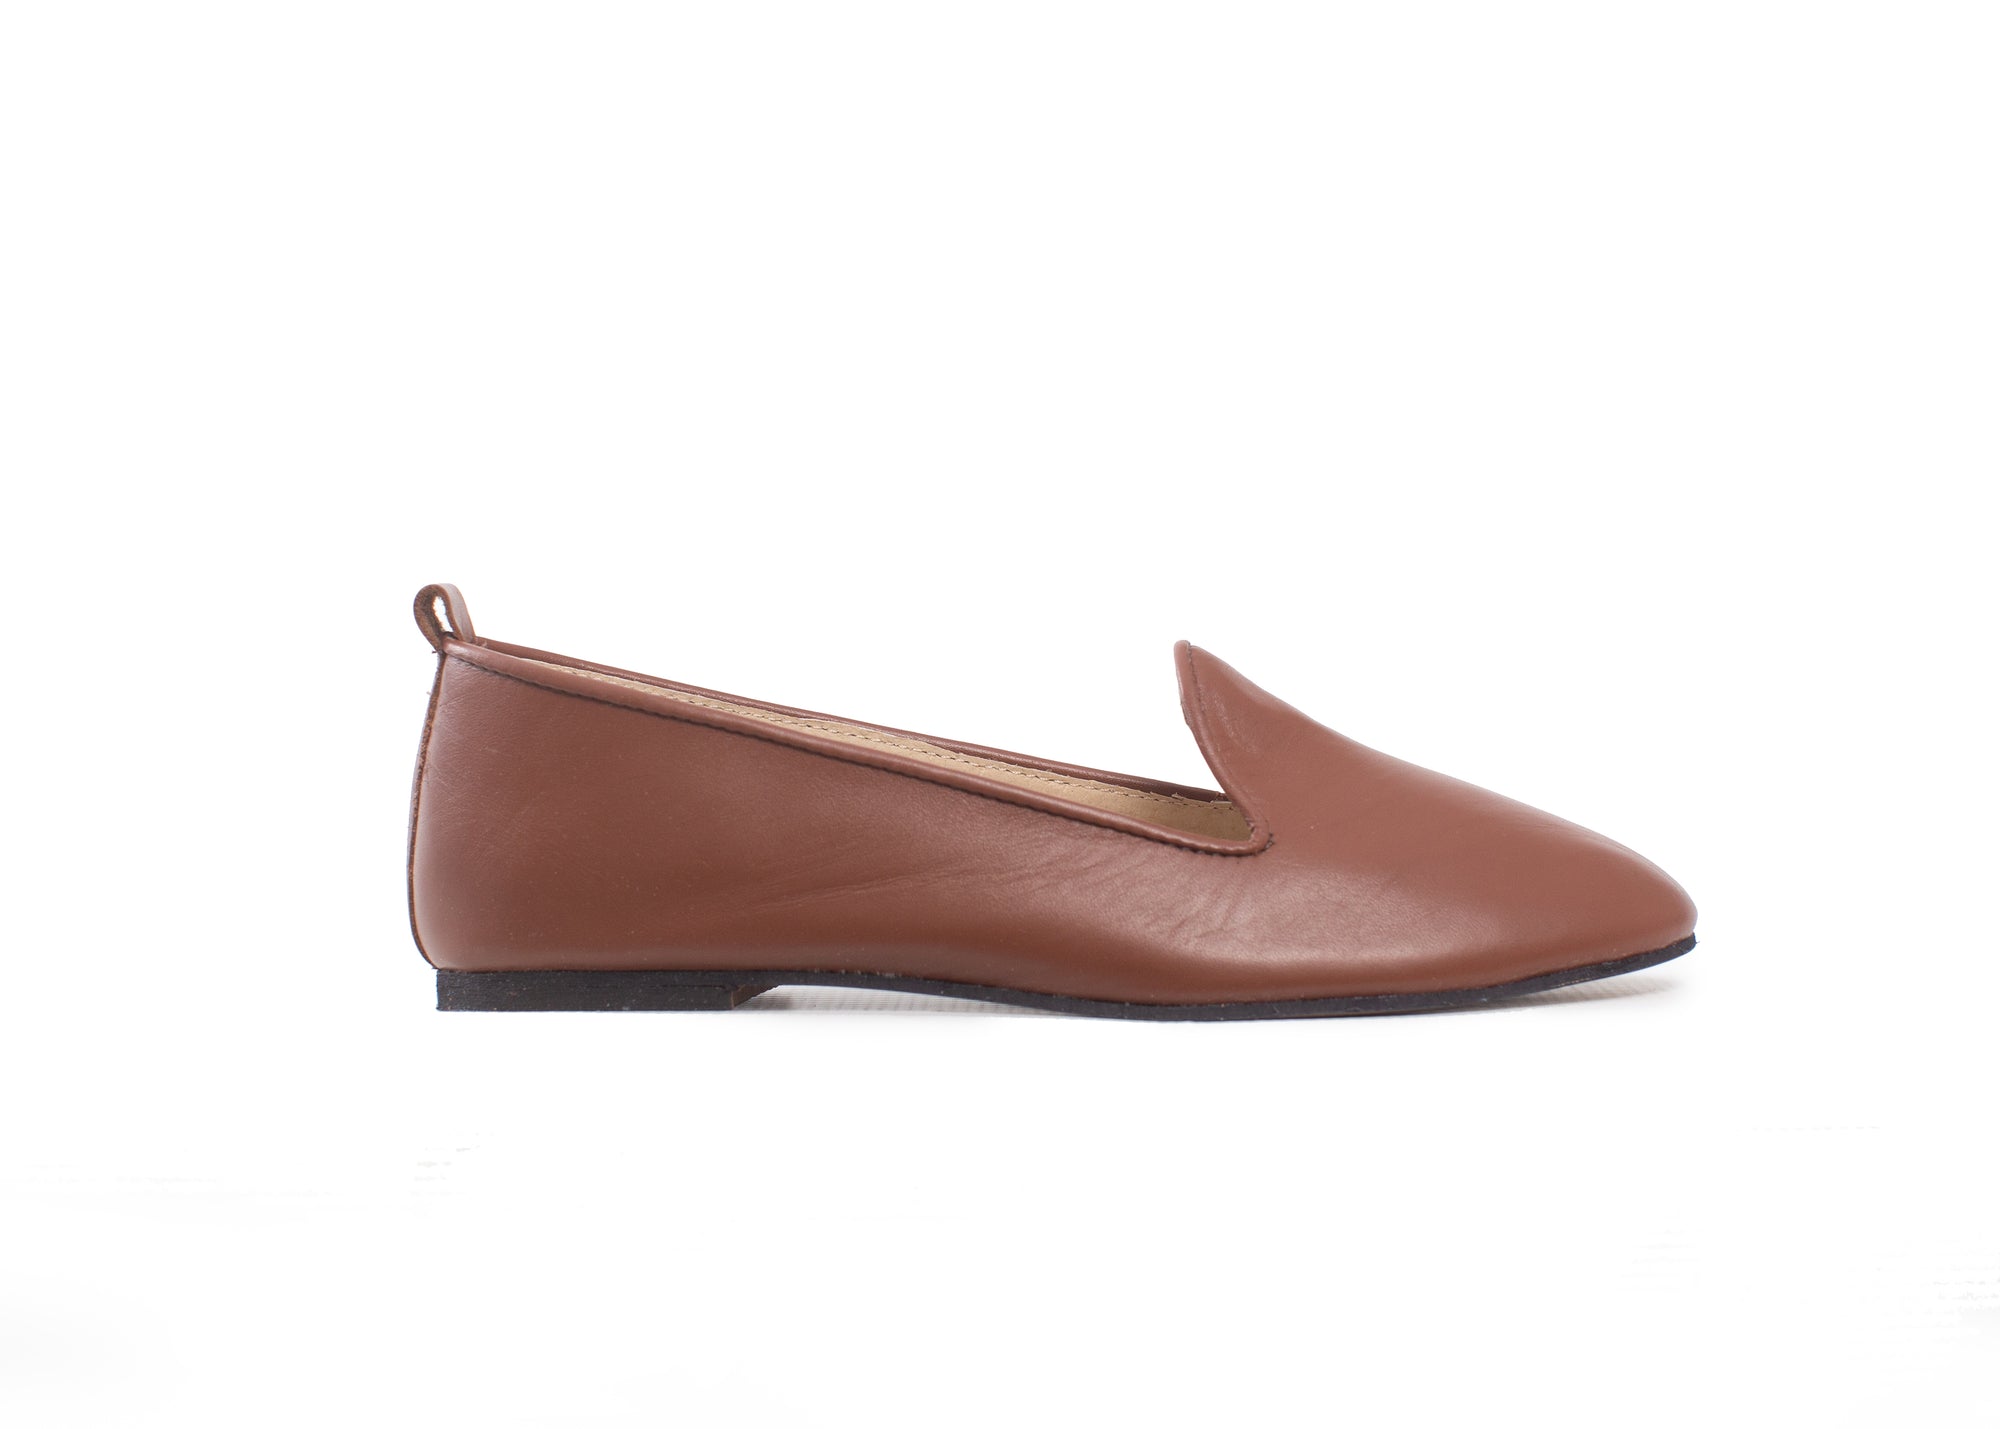 Round loafer - tan leather